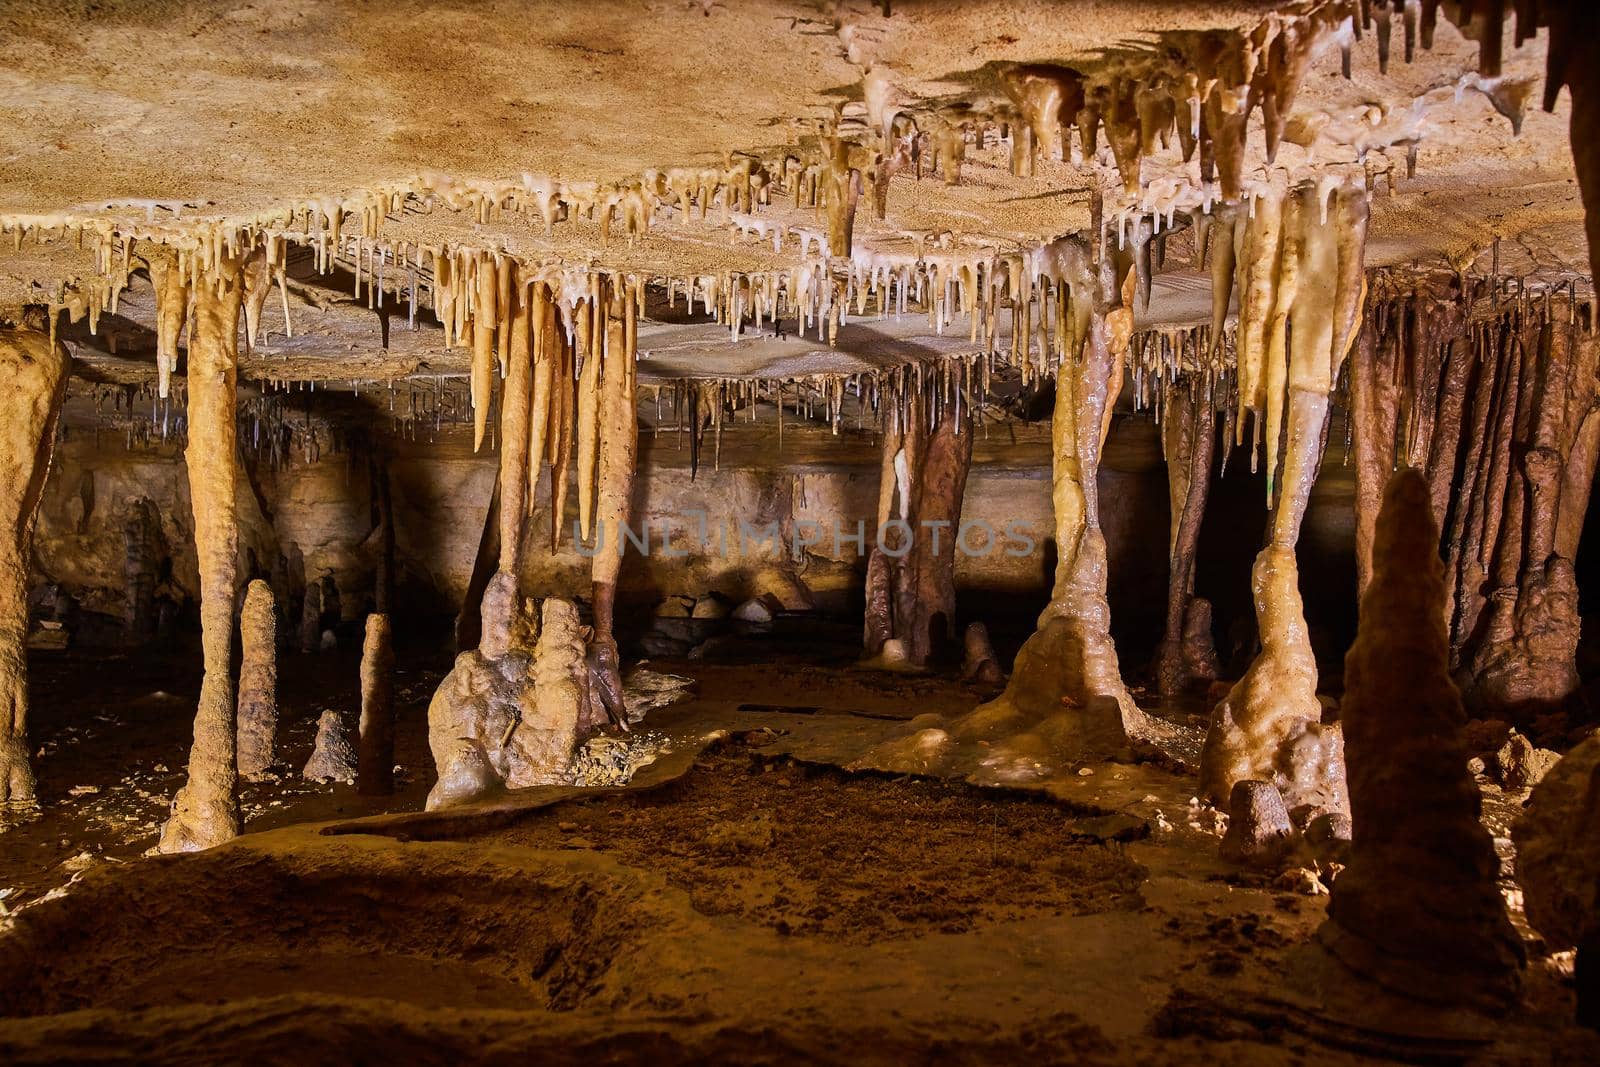 Formations of stalagmites and stalactites in cave with narrow walking space by njproductions